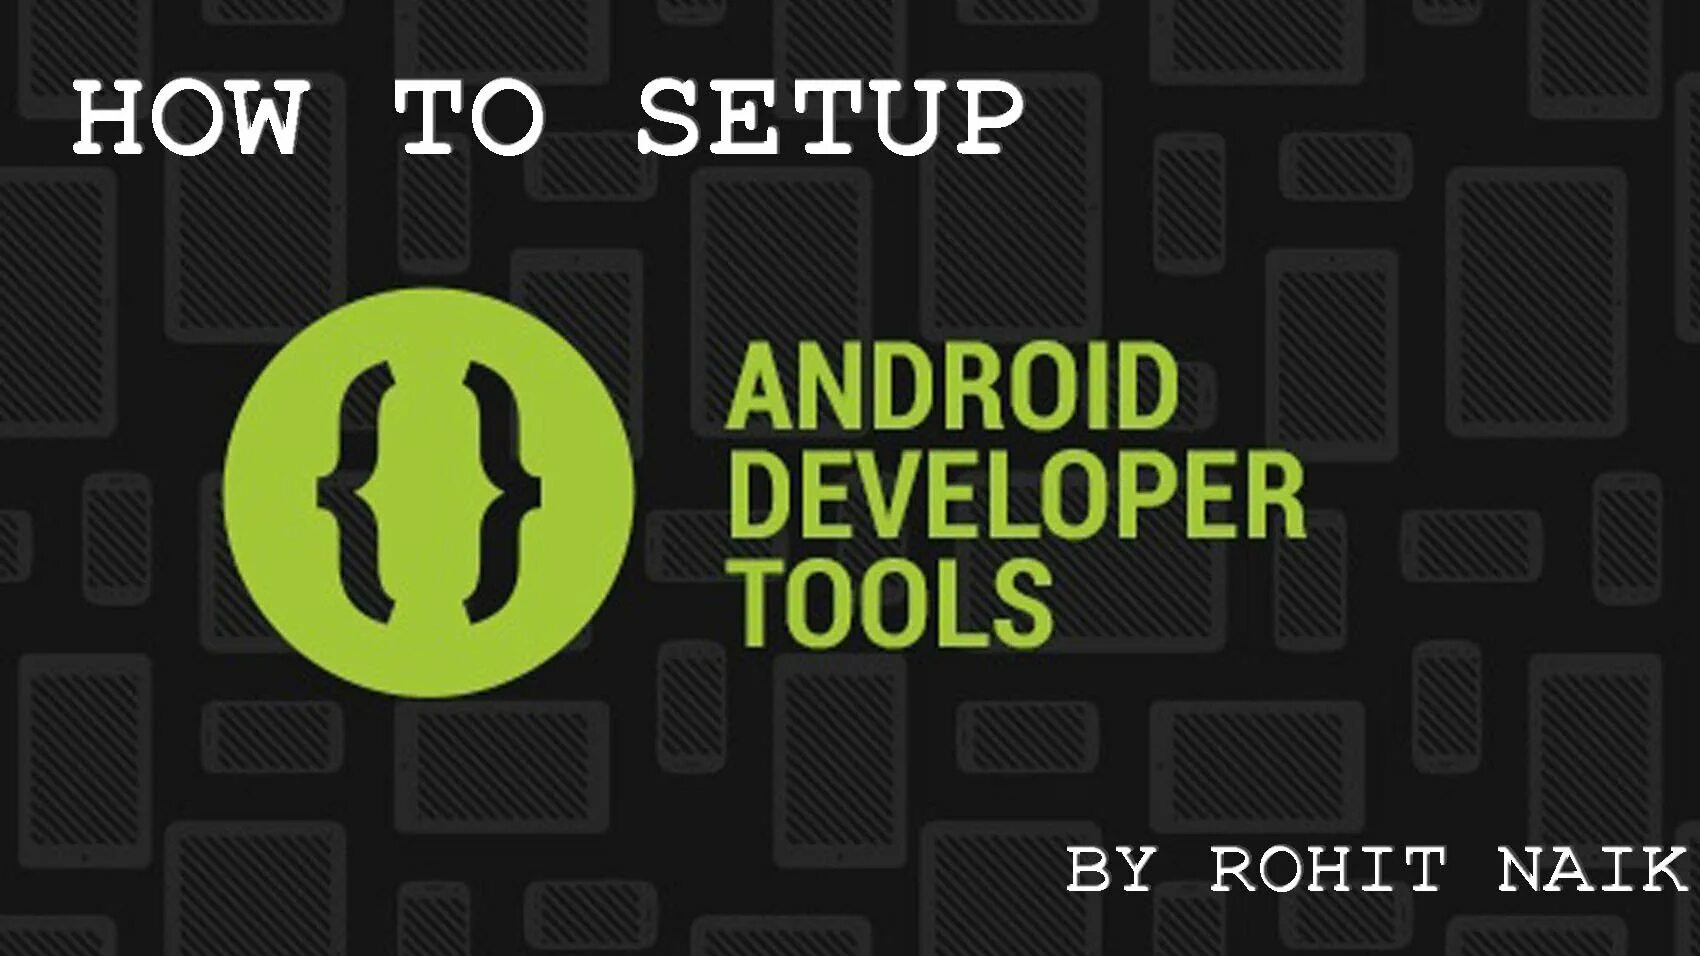 Eclipse android. Android developer. Android ADT. Developer Tools. Джаст Бест Тулс.